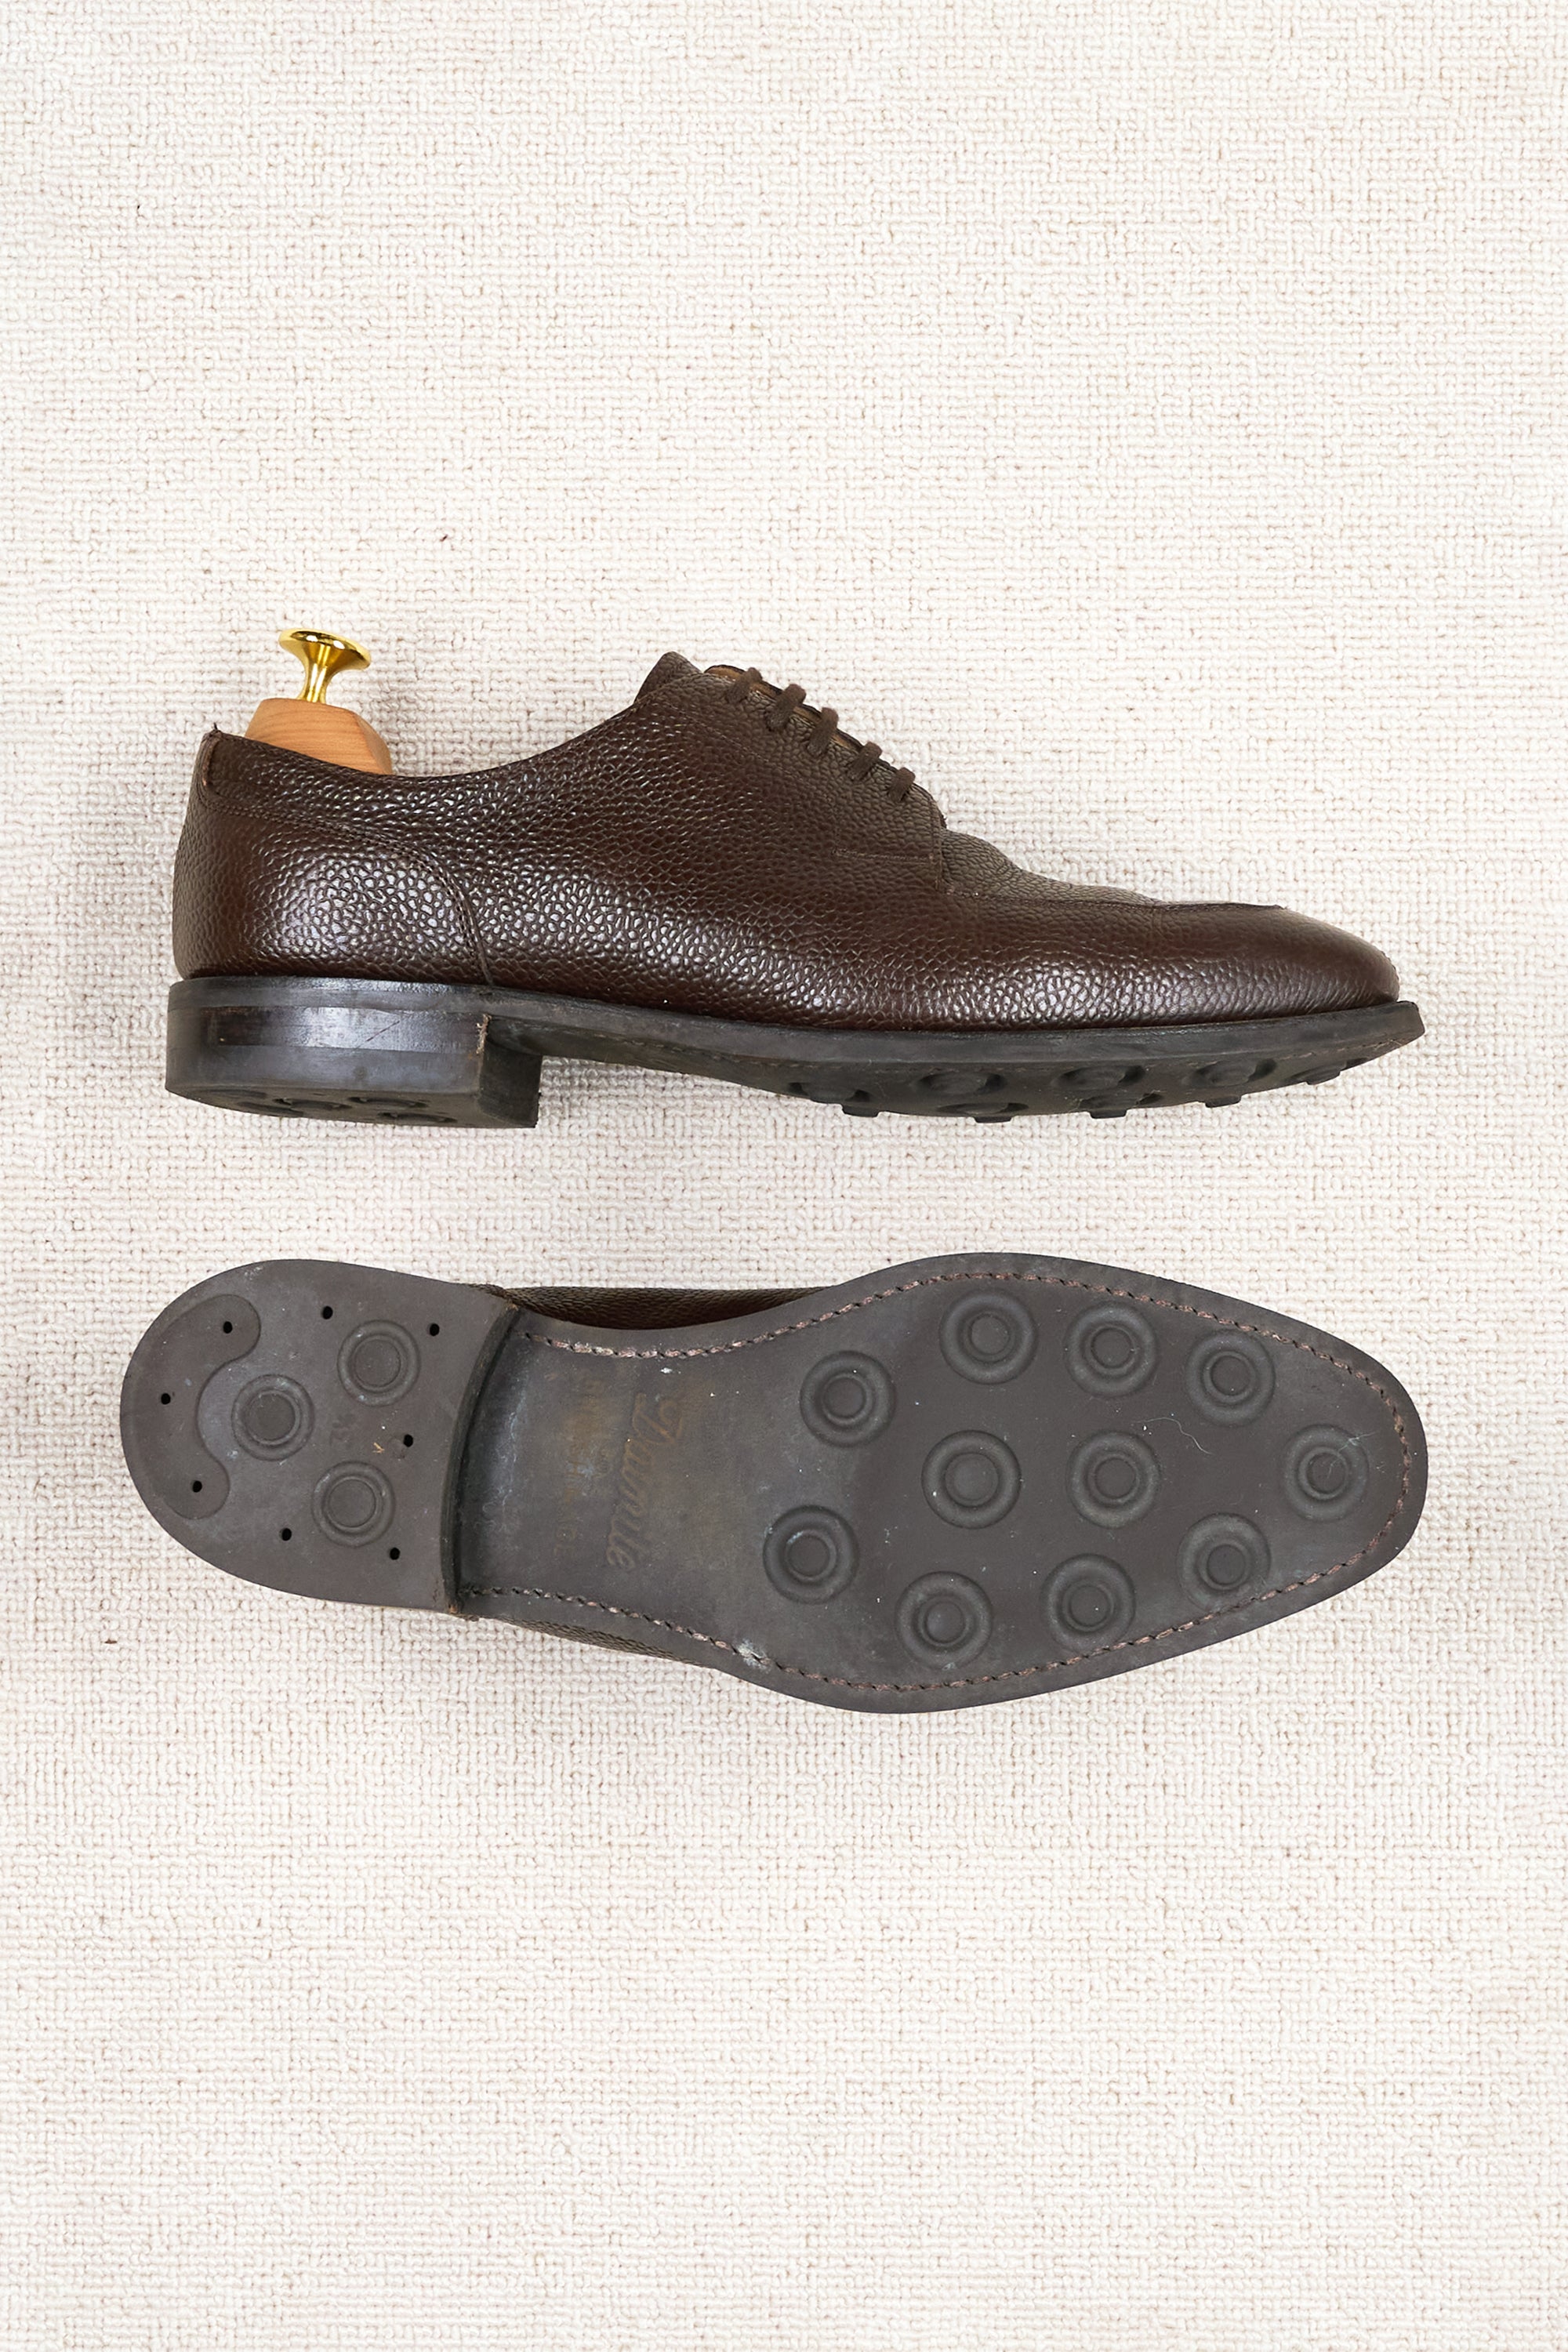 The Armoury Hajime 101808 Jubilee Dark Brown Grained Leather Derby Shoes